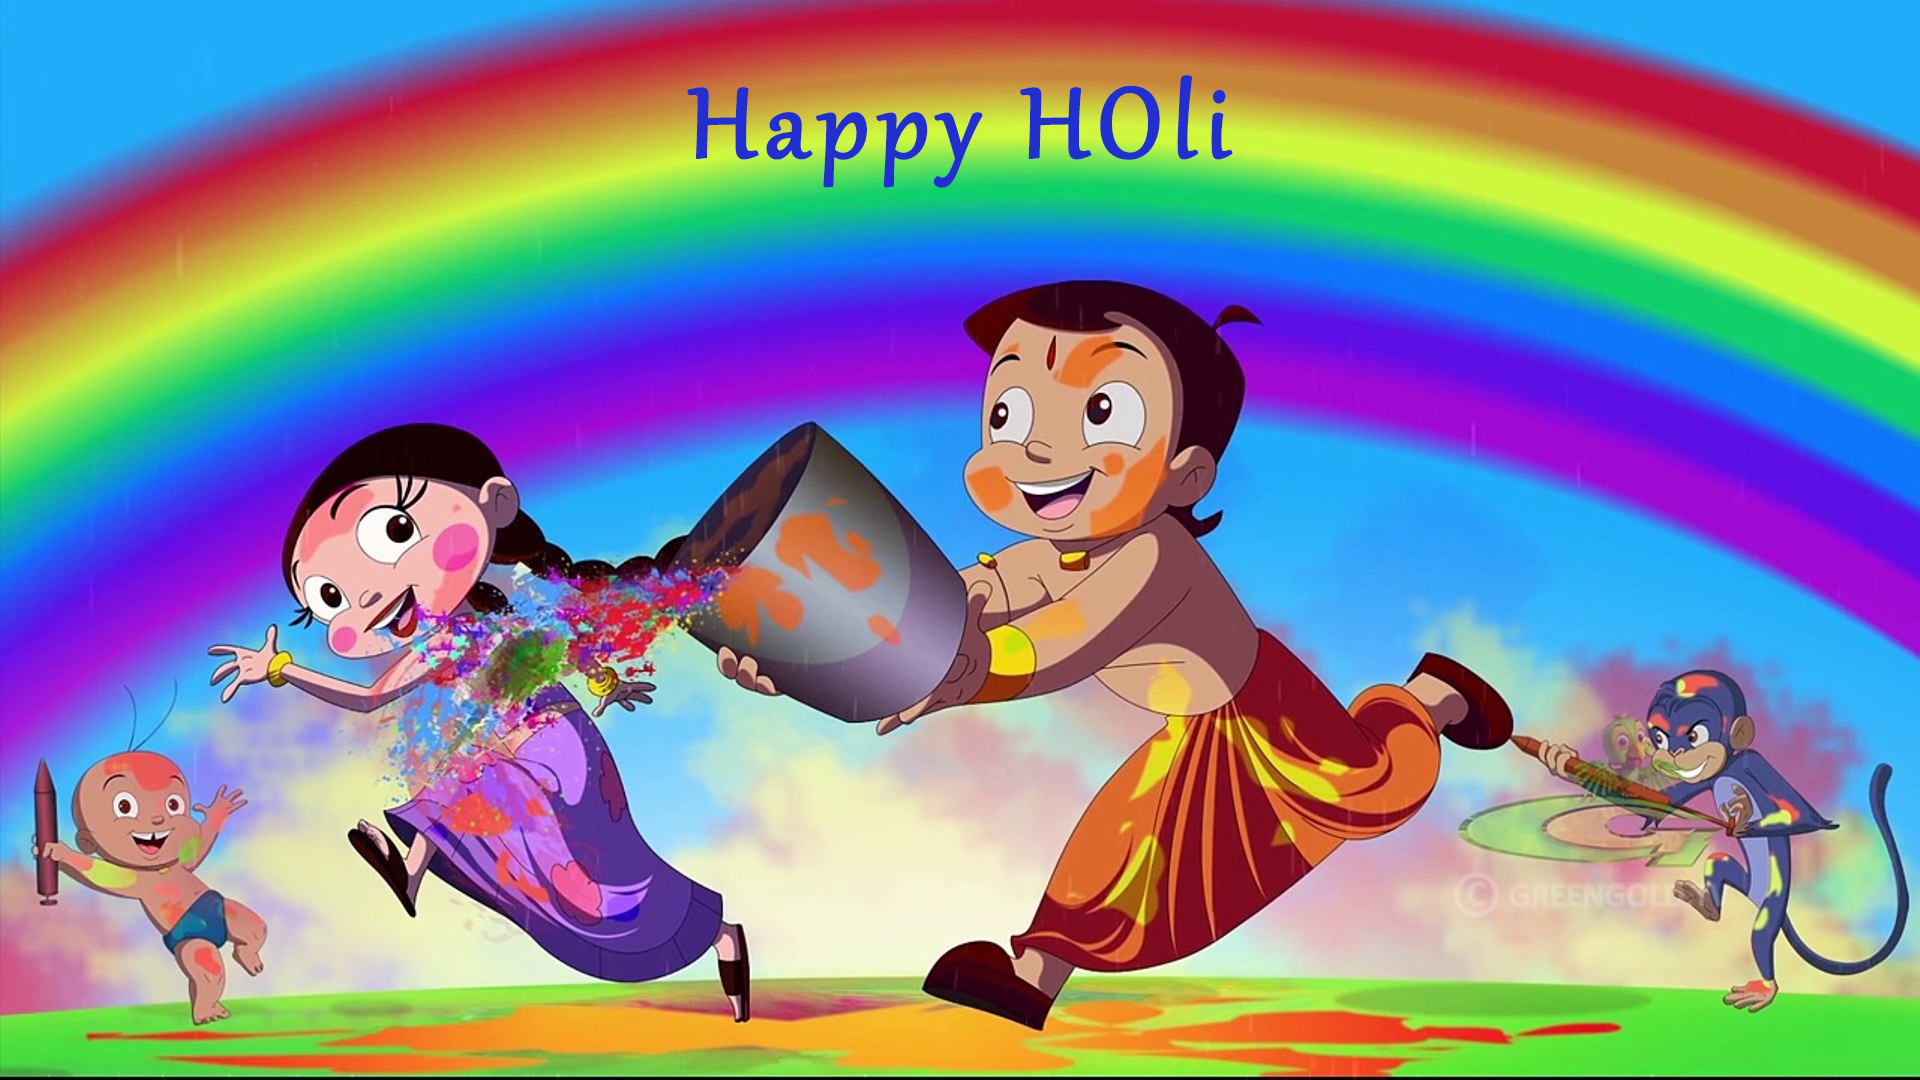 Images Of Holi Festival In Cartoon - Happy Holi Images Cartoon , HD Wallpaper & Backgrounds